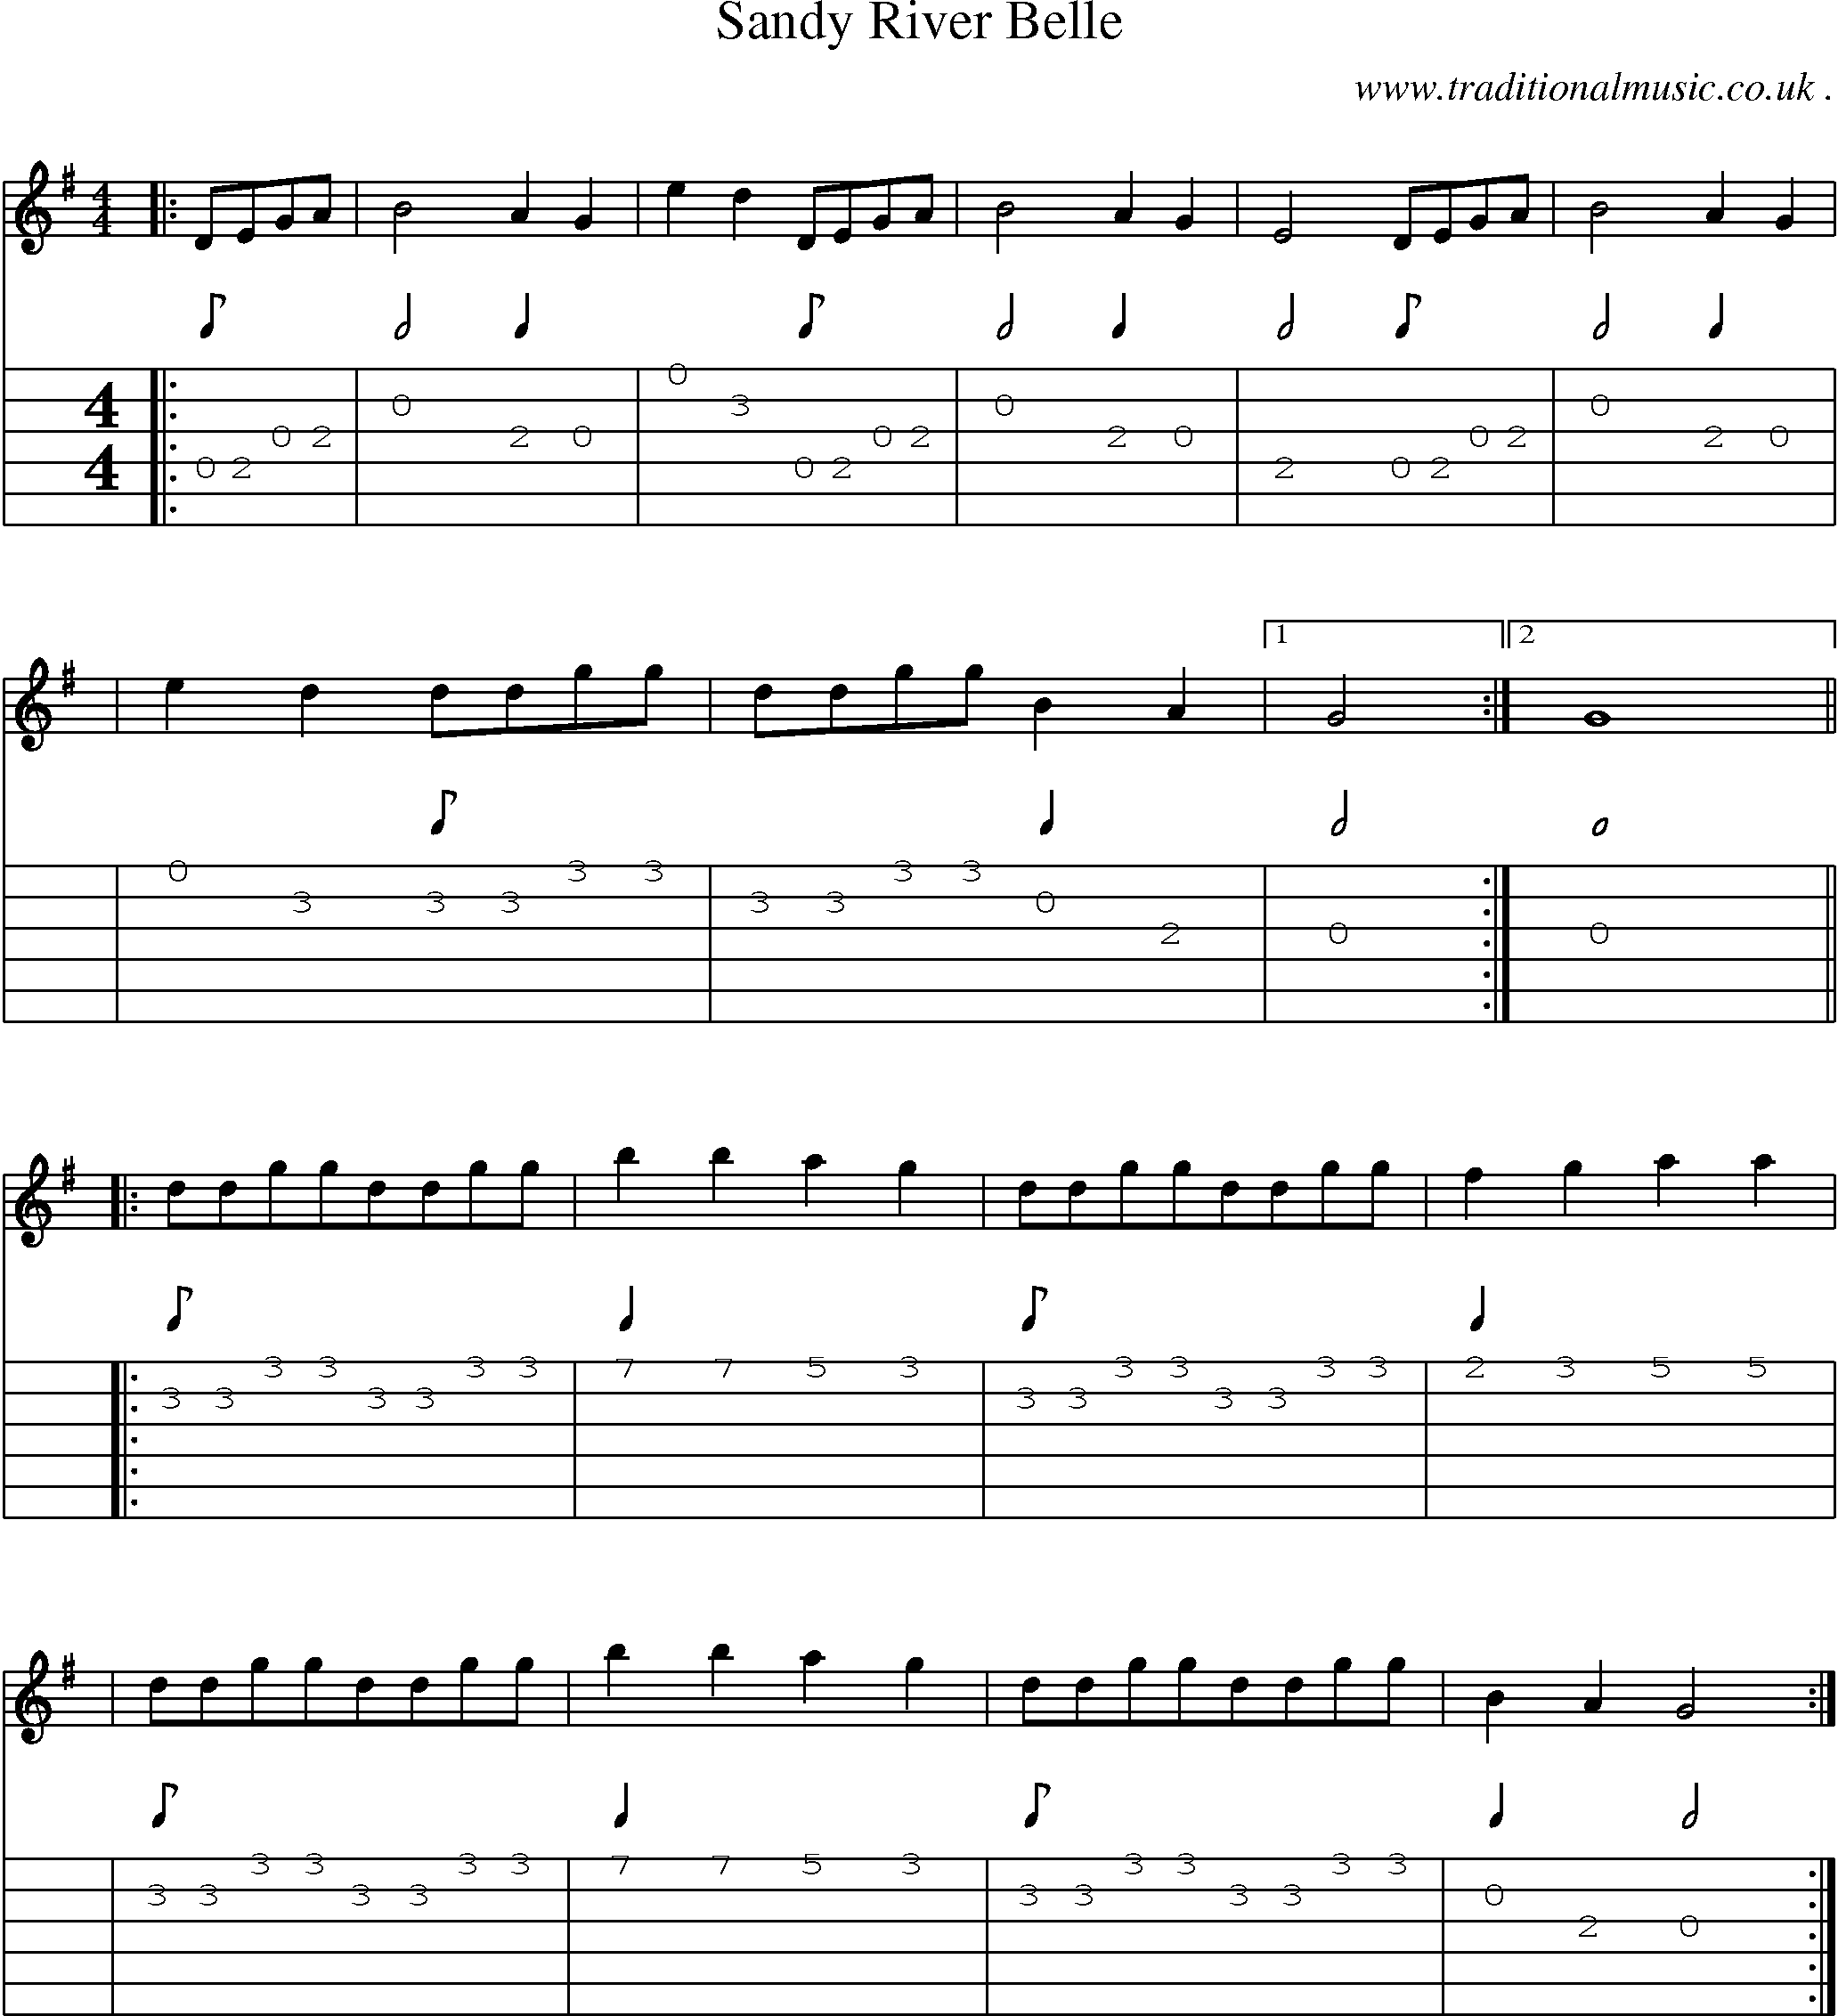 Music Score and Guitar Tabs for Sandy River Belle